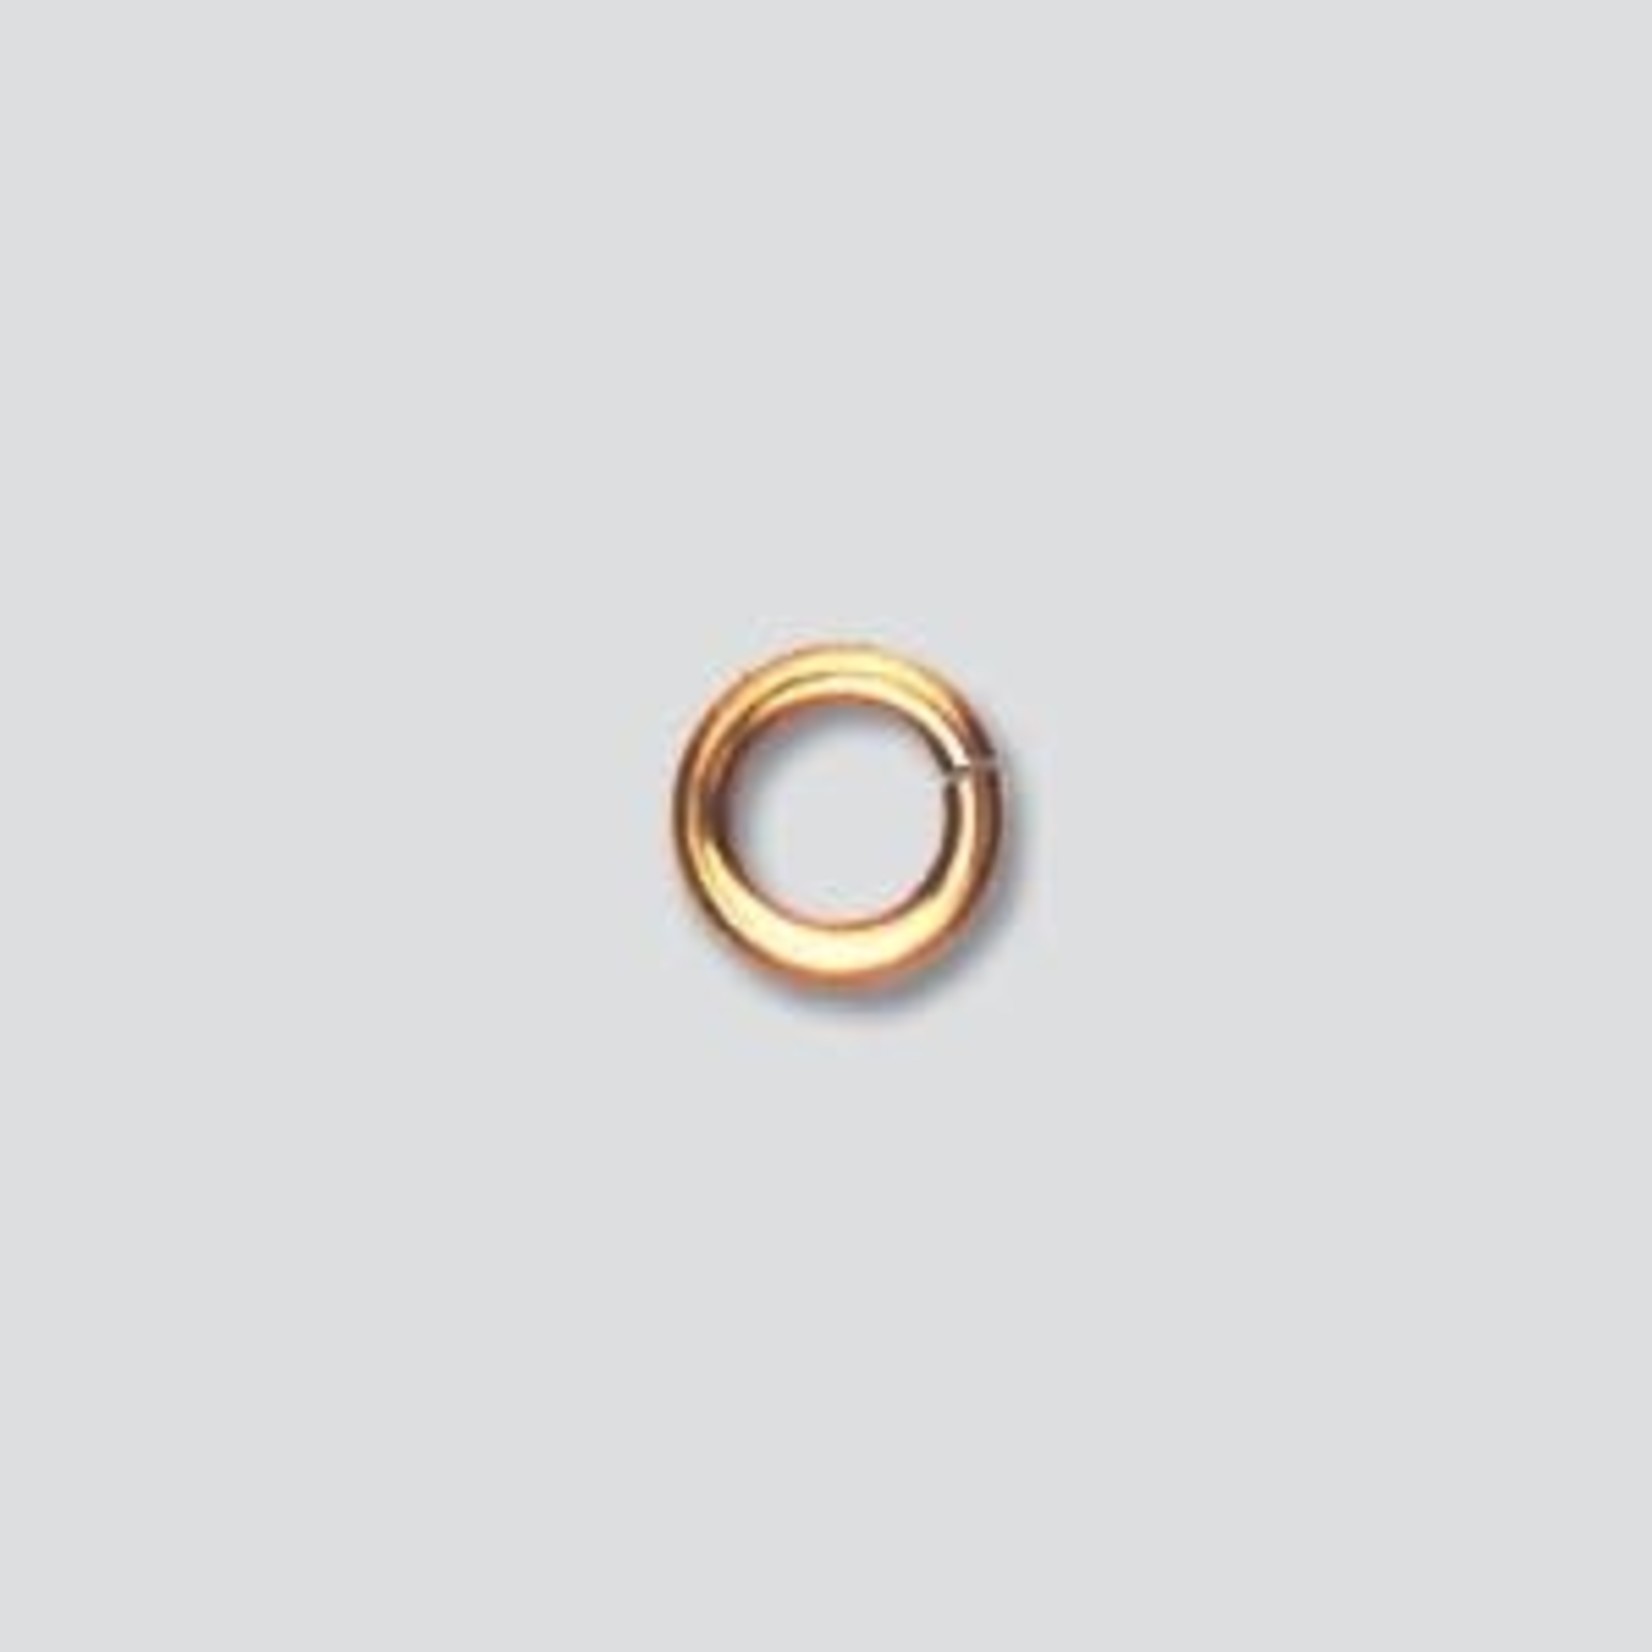 Gold Filled 5mm 18ga Heavy Open Jump Ring - 10 Pieces